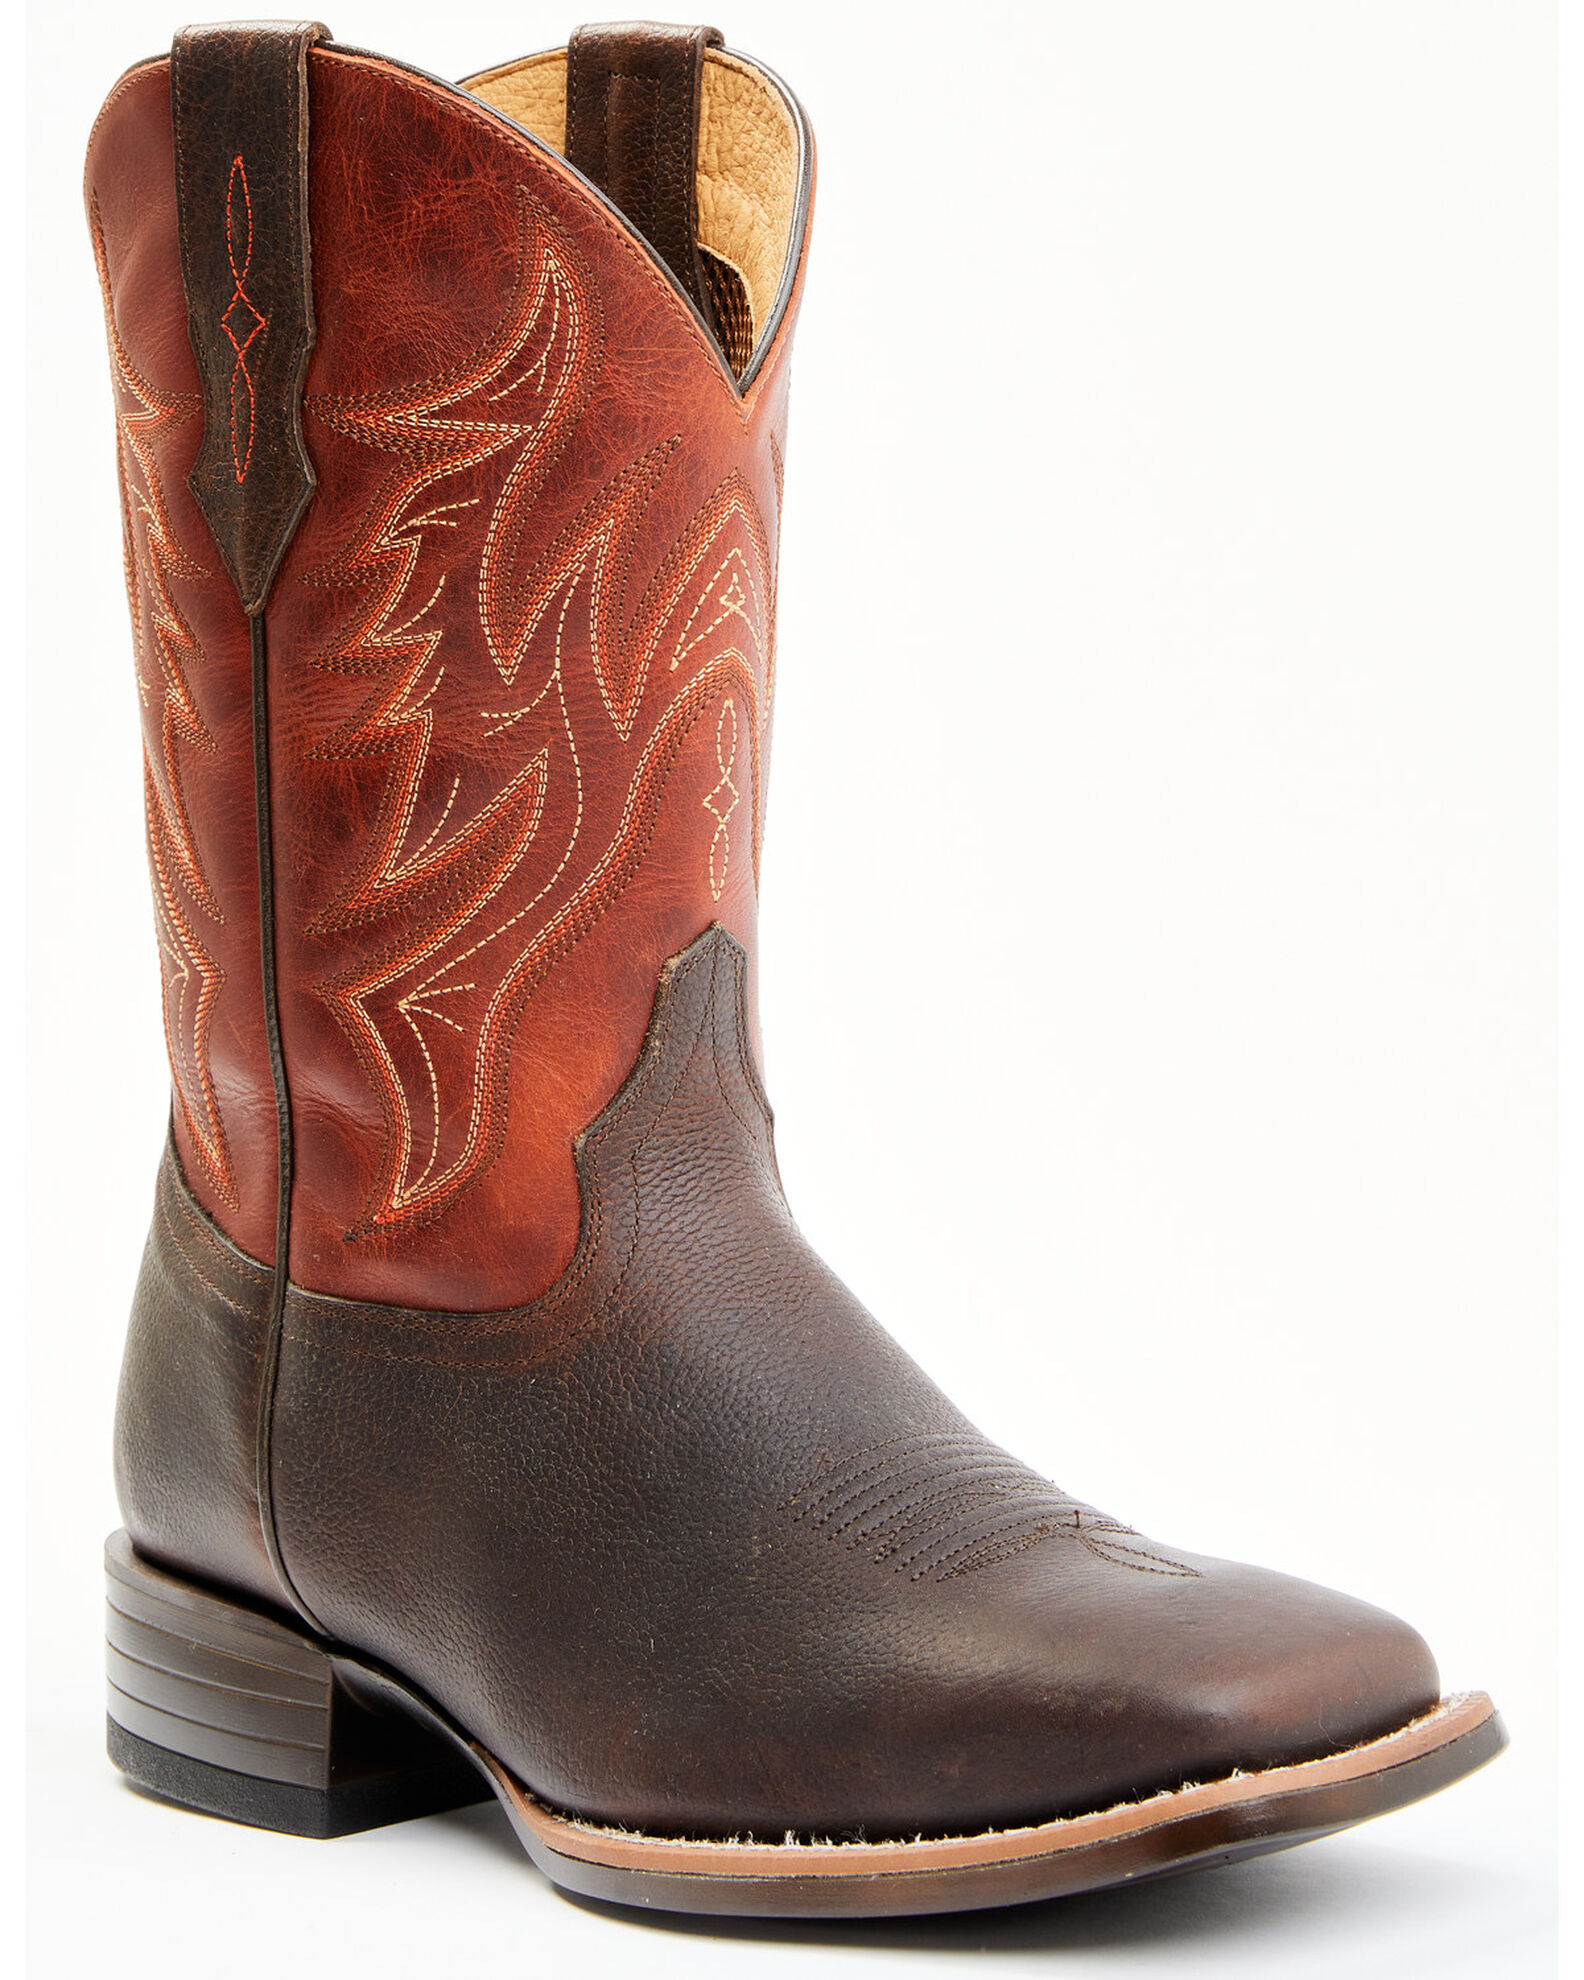 Cody James Men's Orange Hoverfly Performance Western Boots - Broad ...